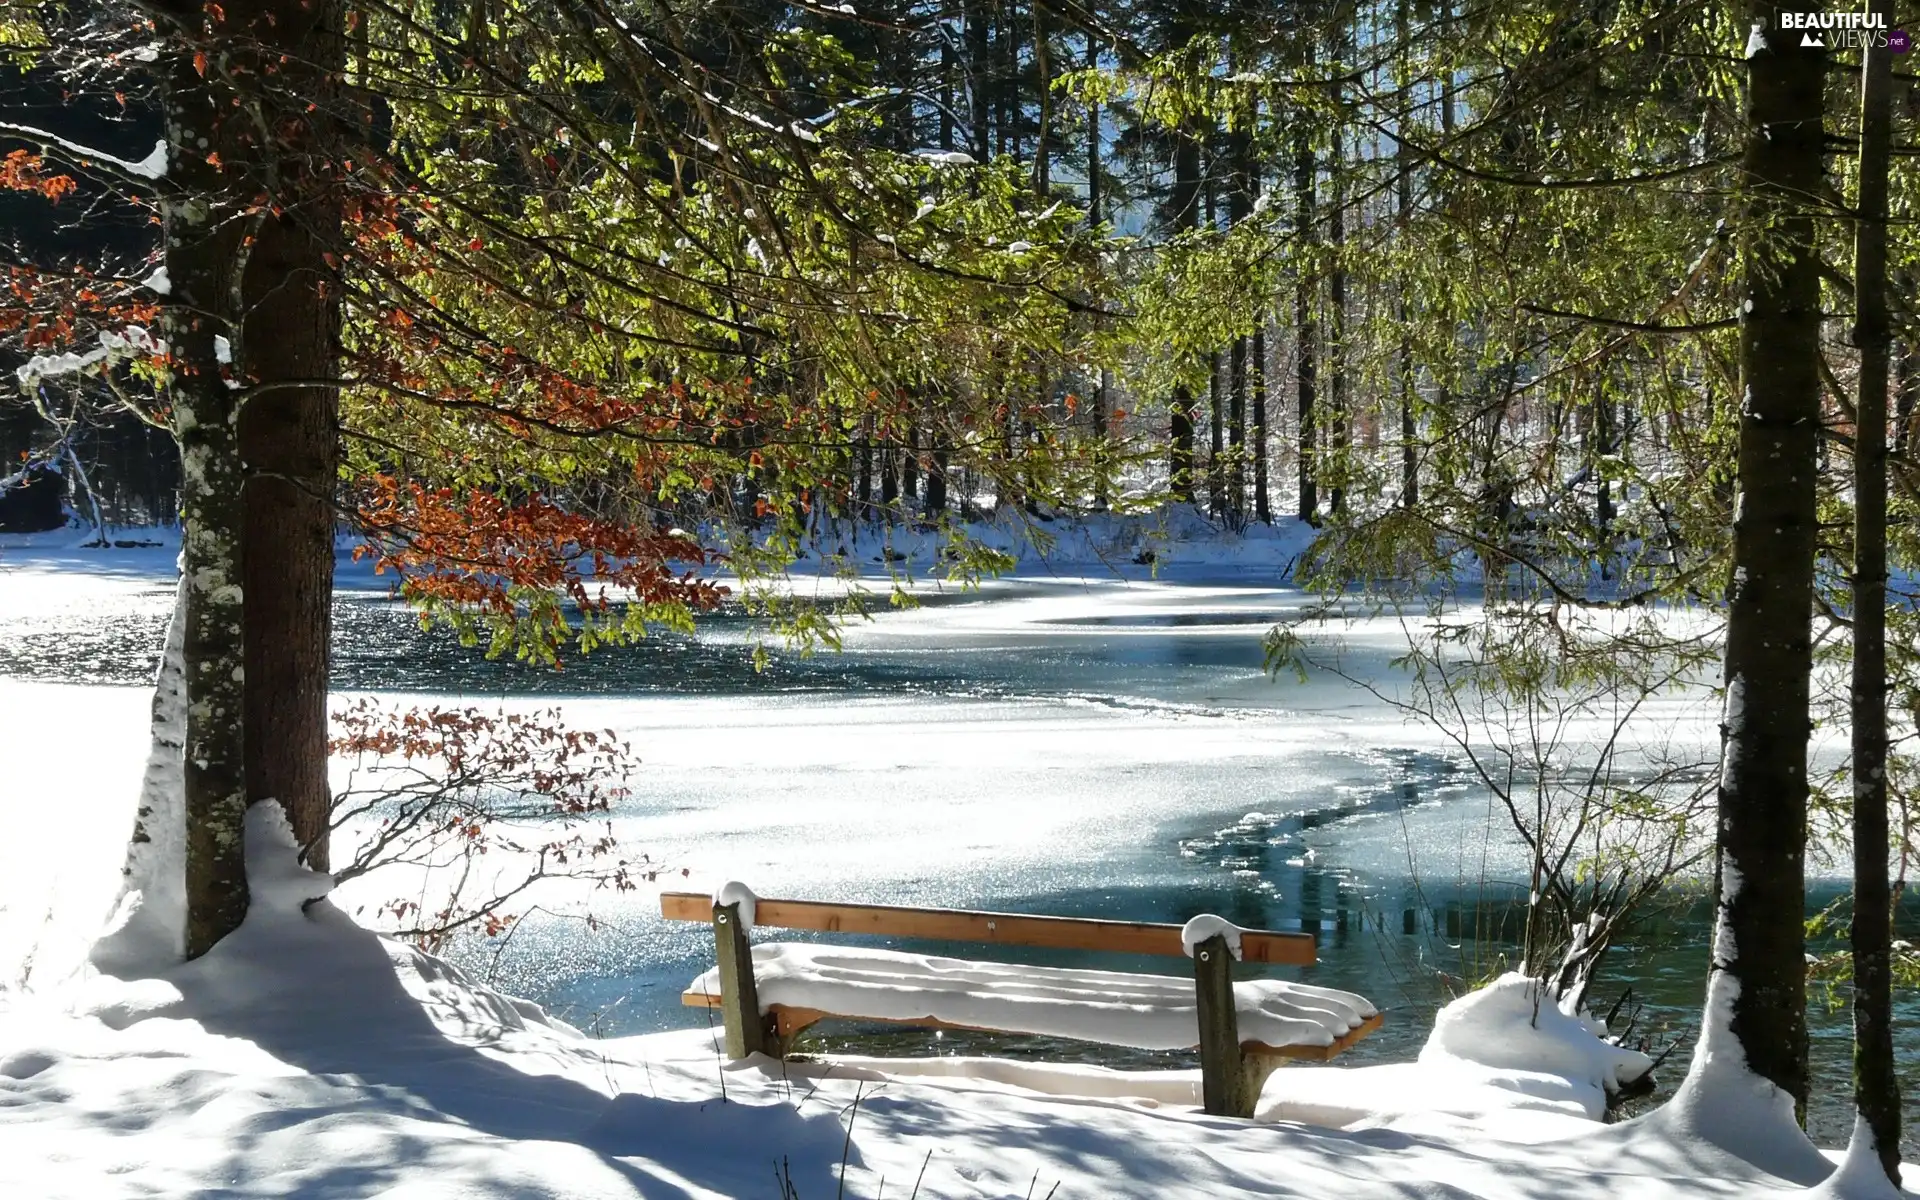 Frozen, River, viewes, Bench, trees